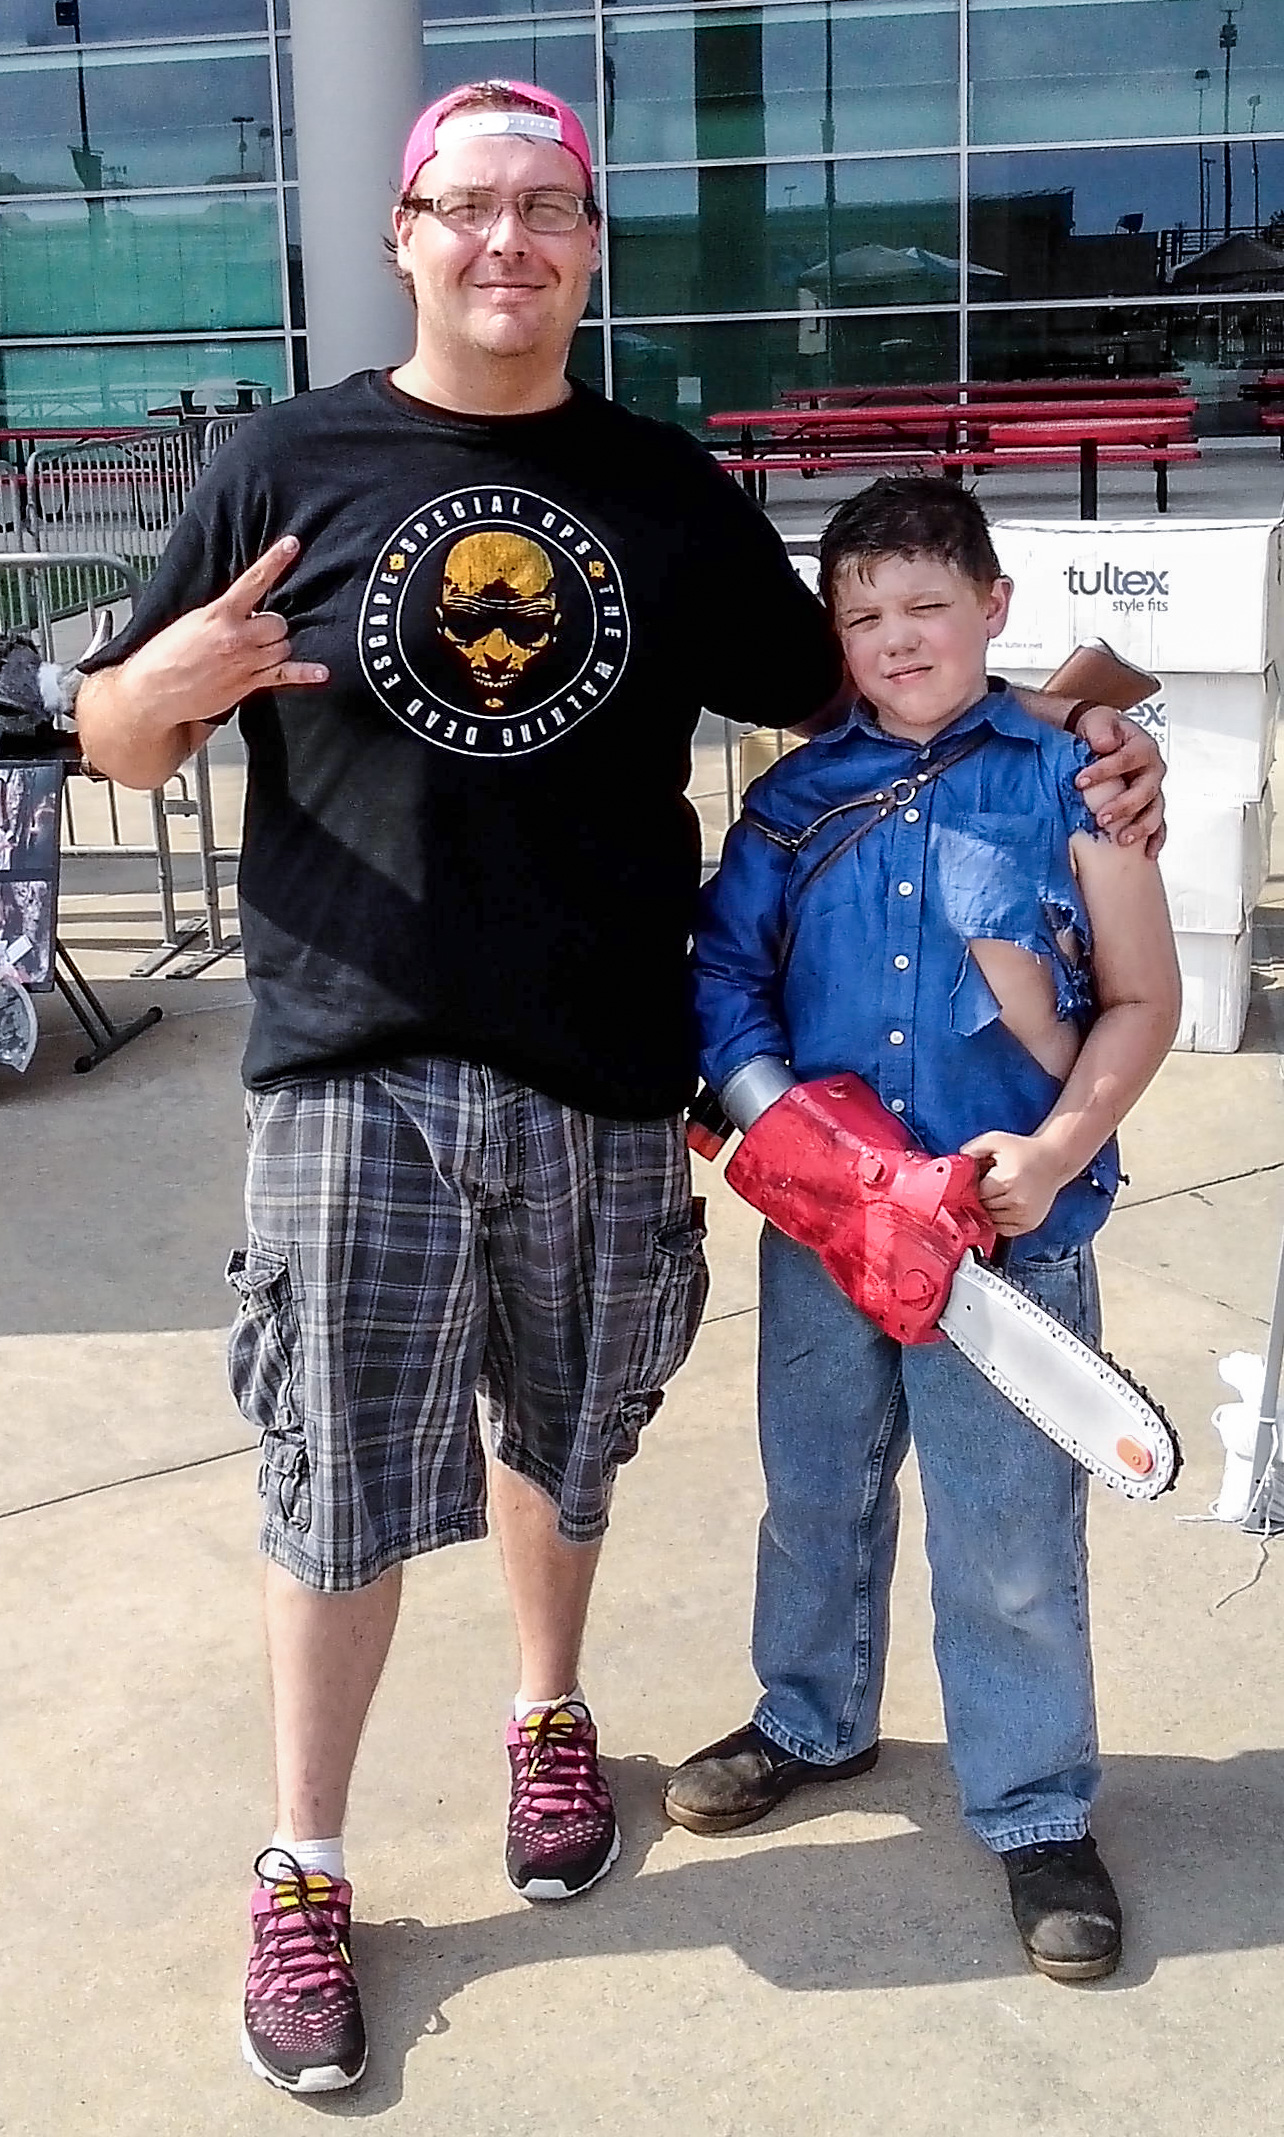 A photo of myself and the son of Jason Harris, prop master, dressed as Ash from Army of Darkness outside of Reliant Stadium at The Walking Dead Escape.